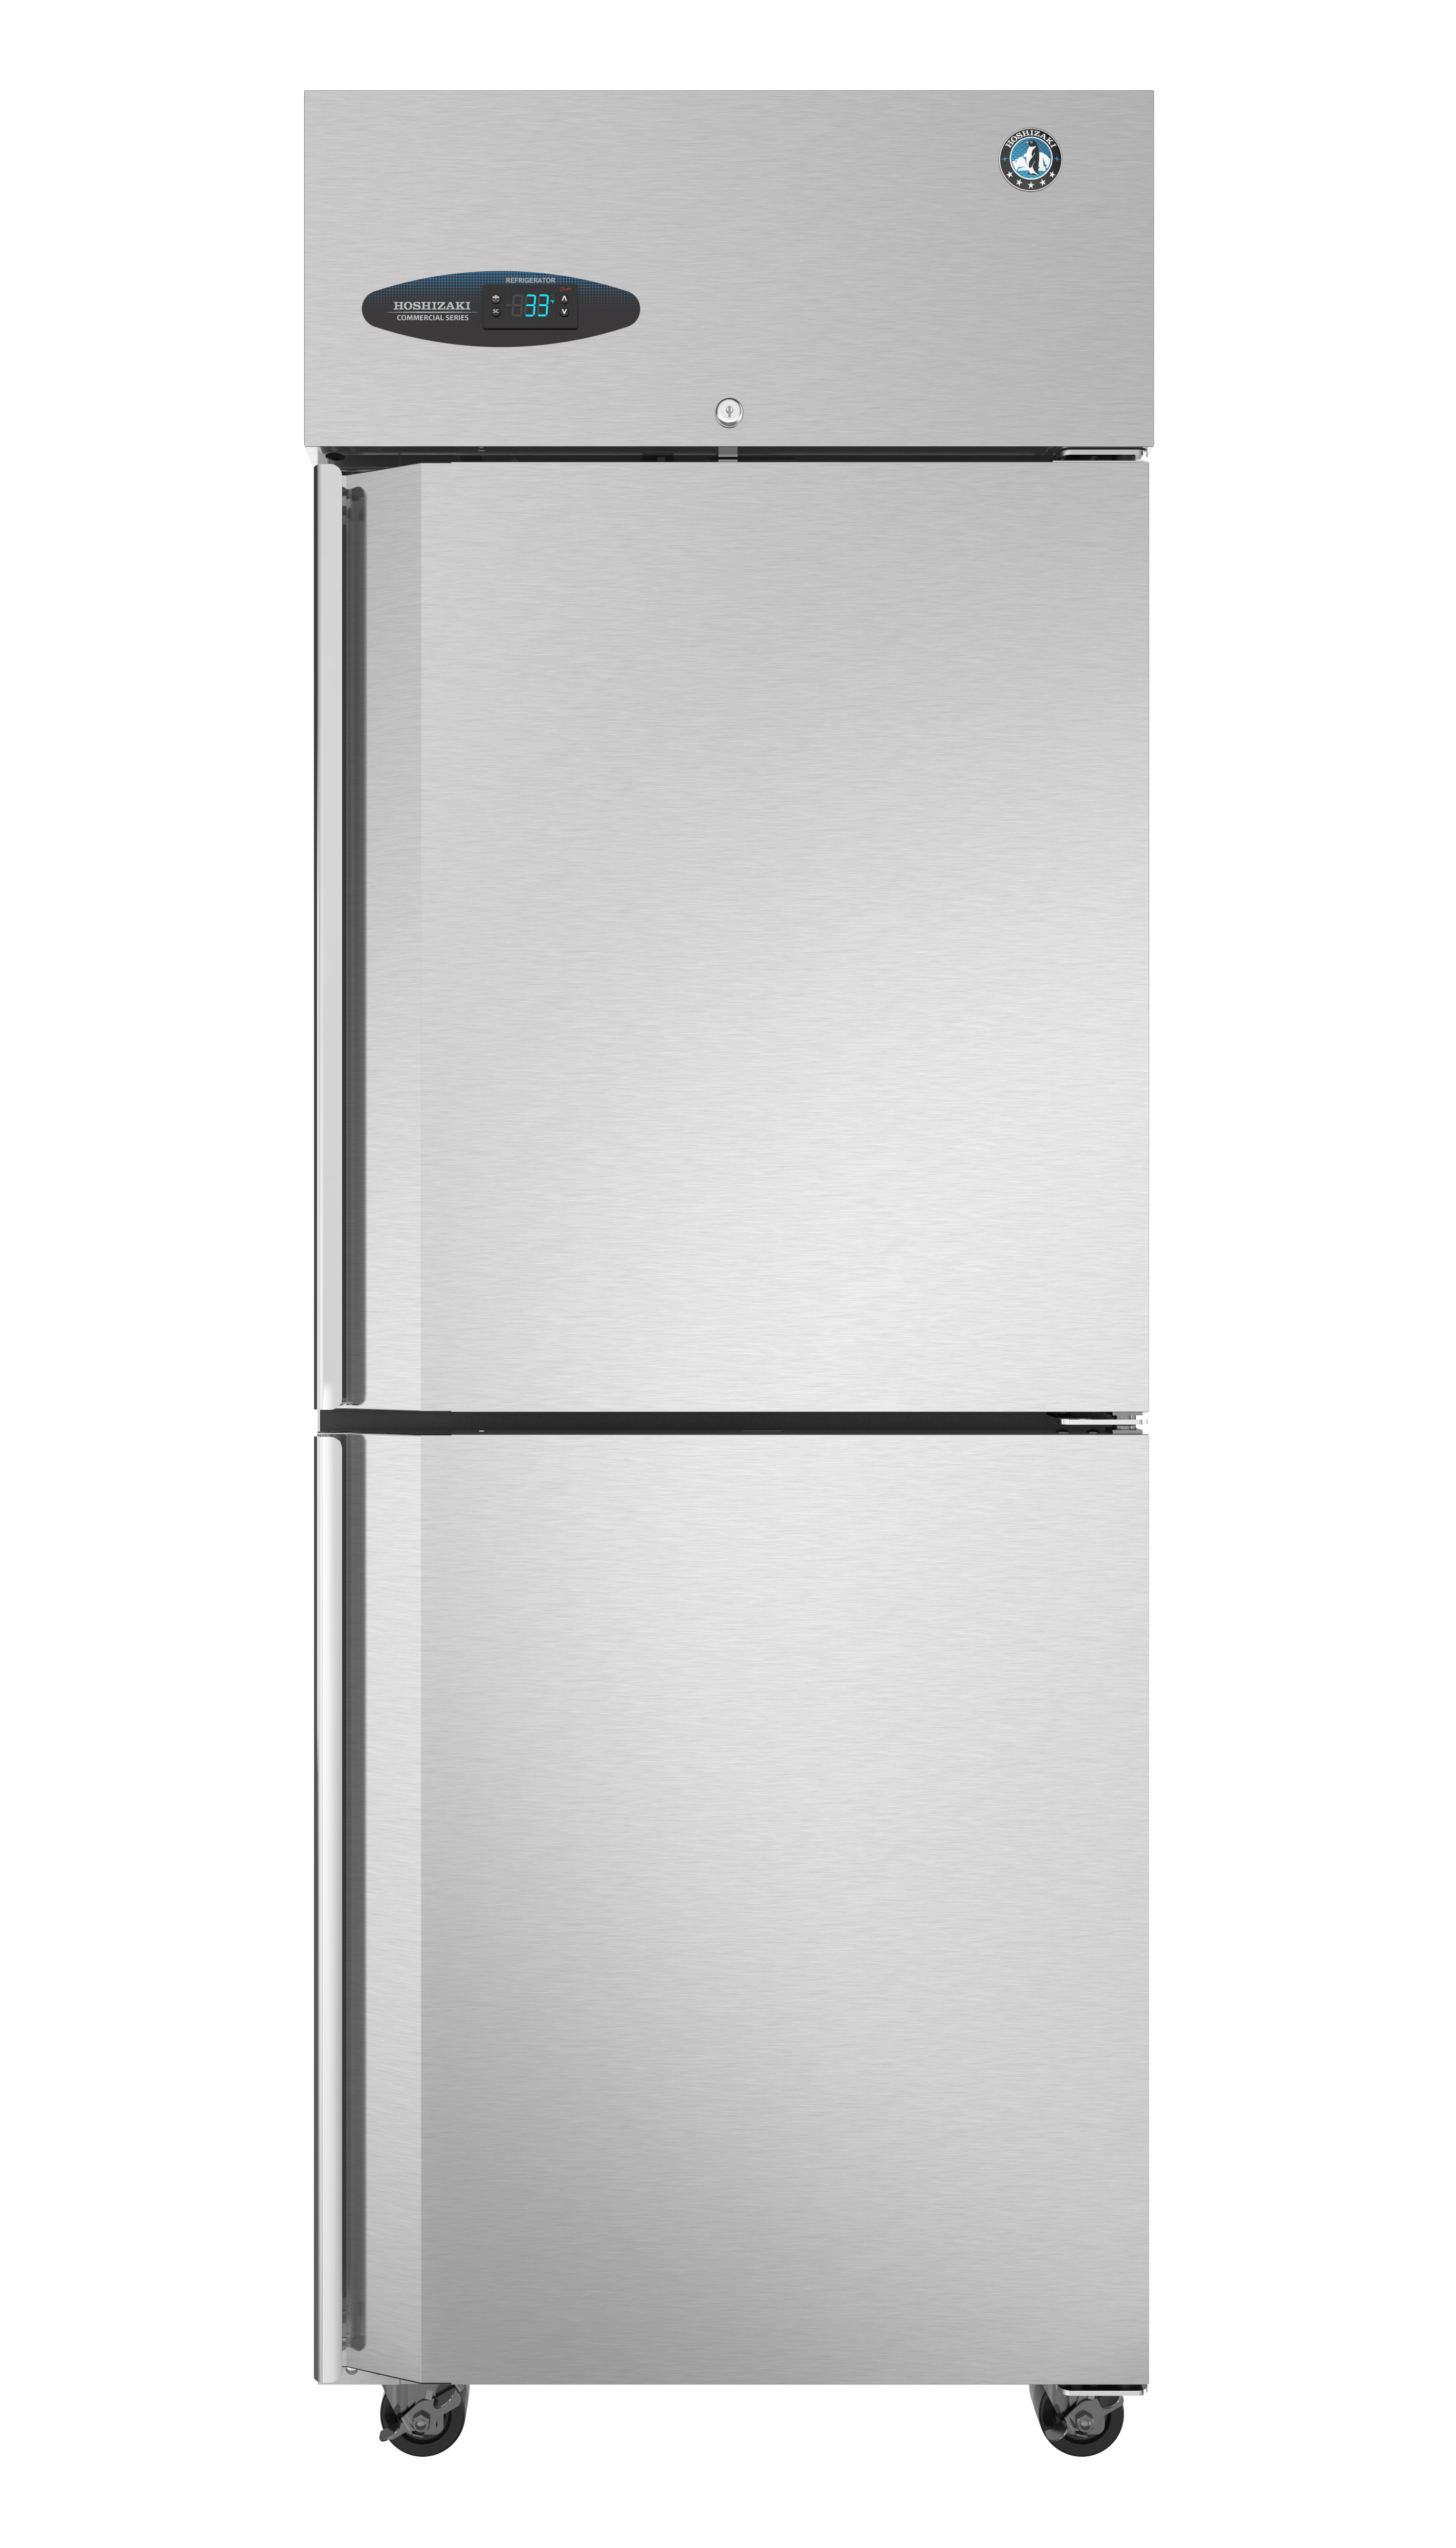 CR1S-HS, Refrigerator, Single Section Upright, Half Stainless Doors